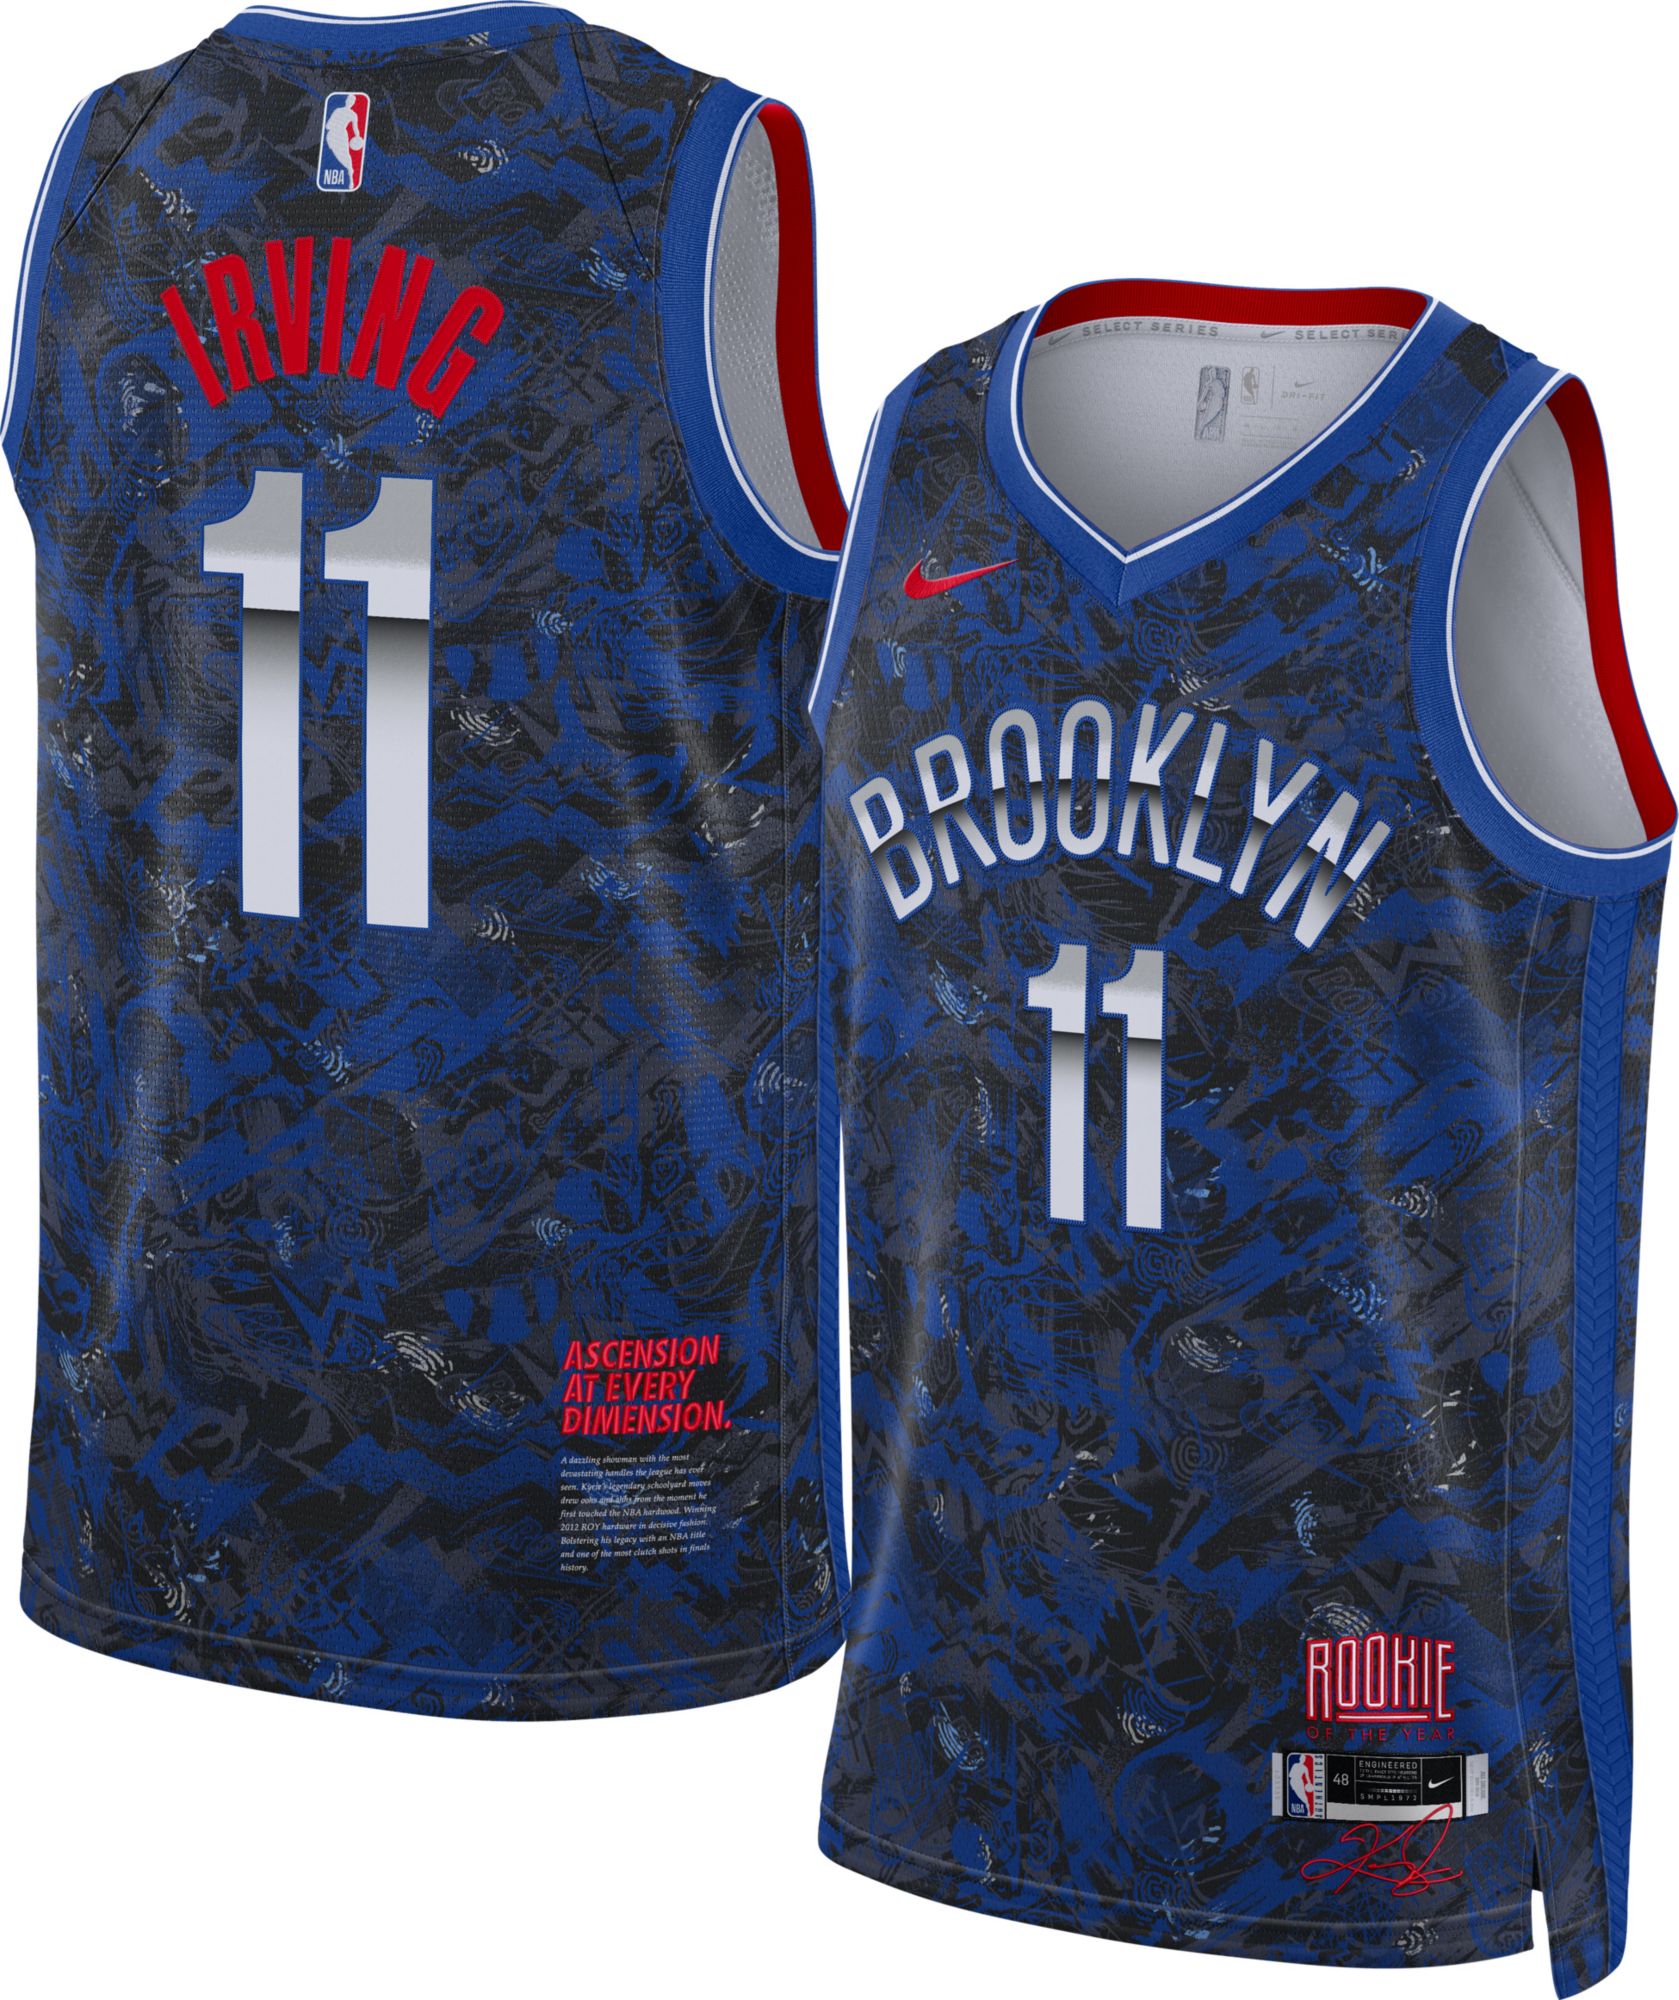 Kyrie Irving Brooklyn Nets Fanatics Authentic Player-Issued #11 Gray Jersey  from the 2019-20 NBA Season